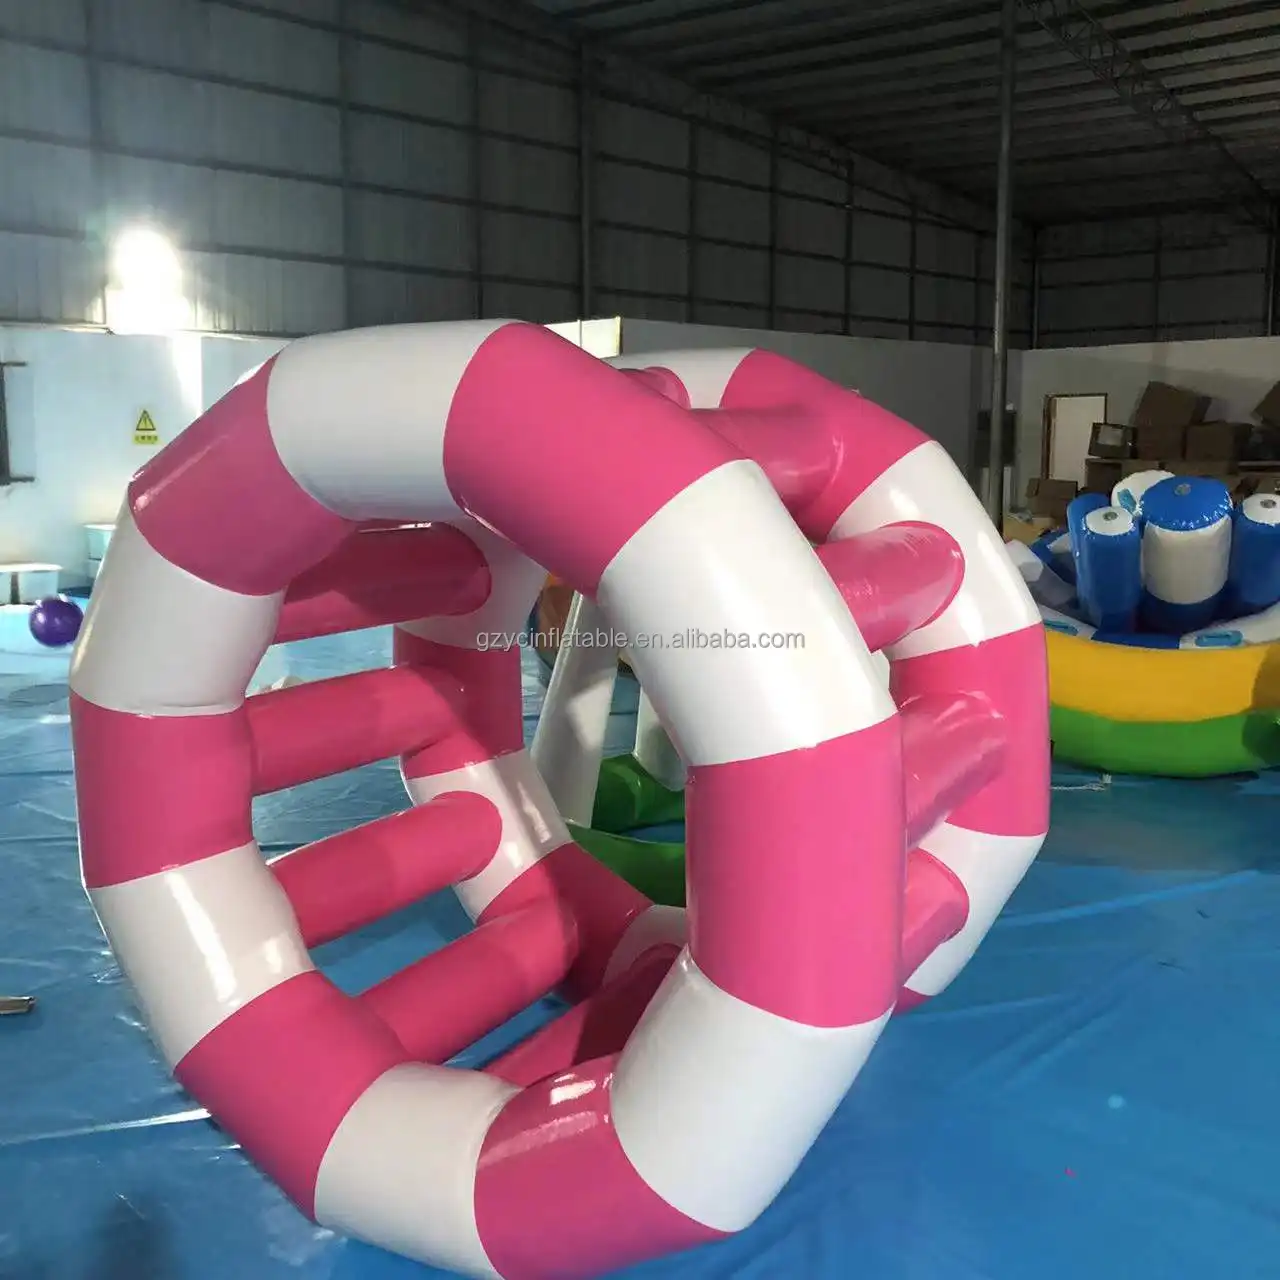 PVC Inflatable Roller Funny Pool Toys Water Roller Ball Inflatable Water Running Ball Inflatable Water Wheel